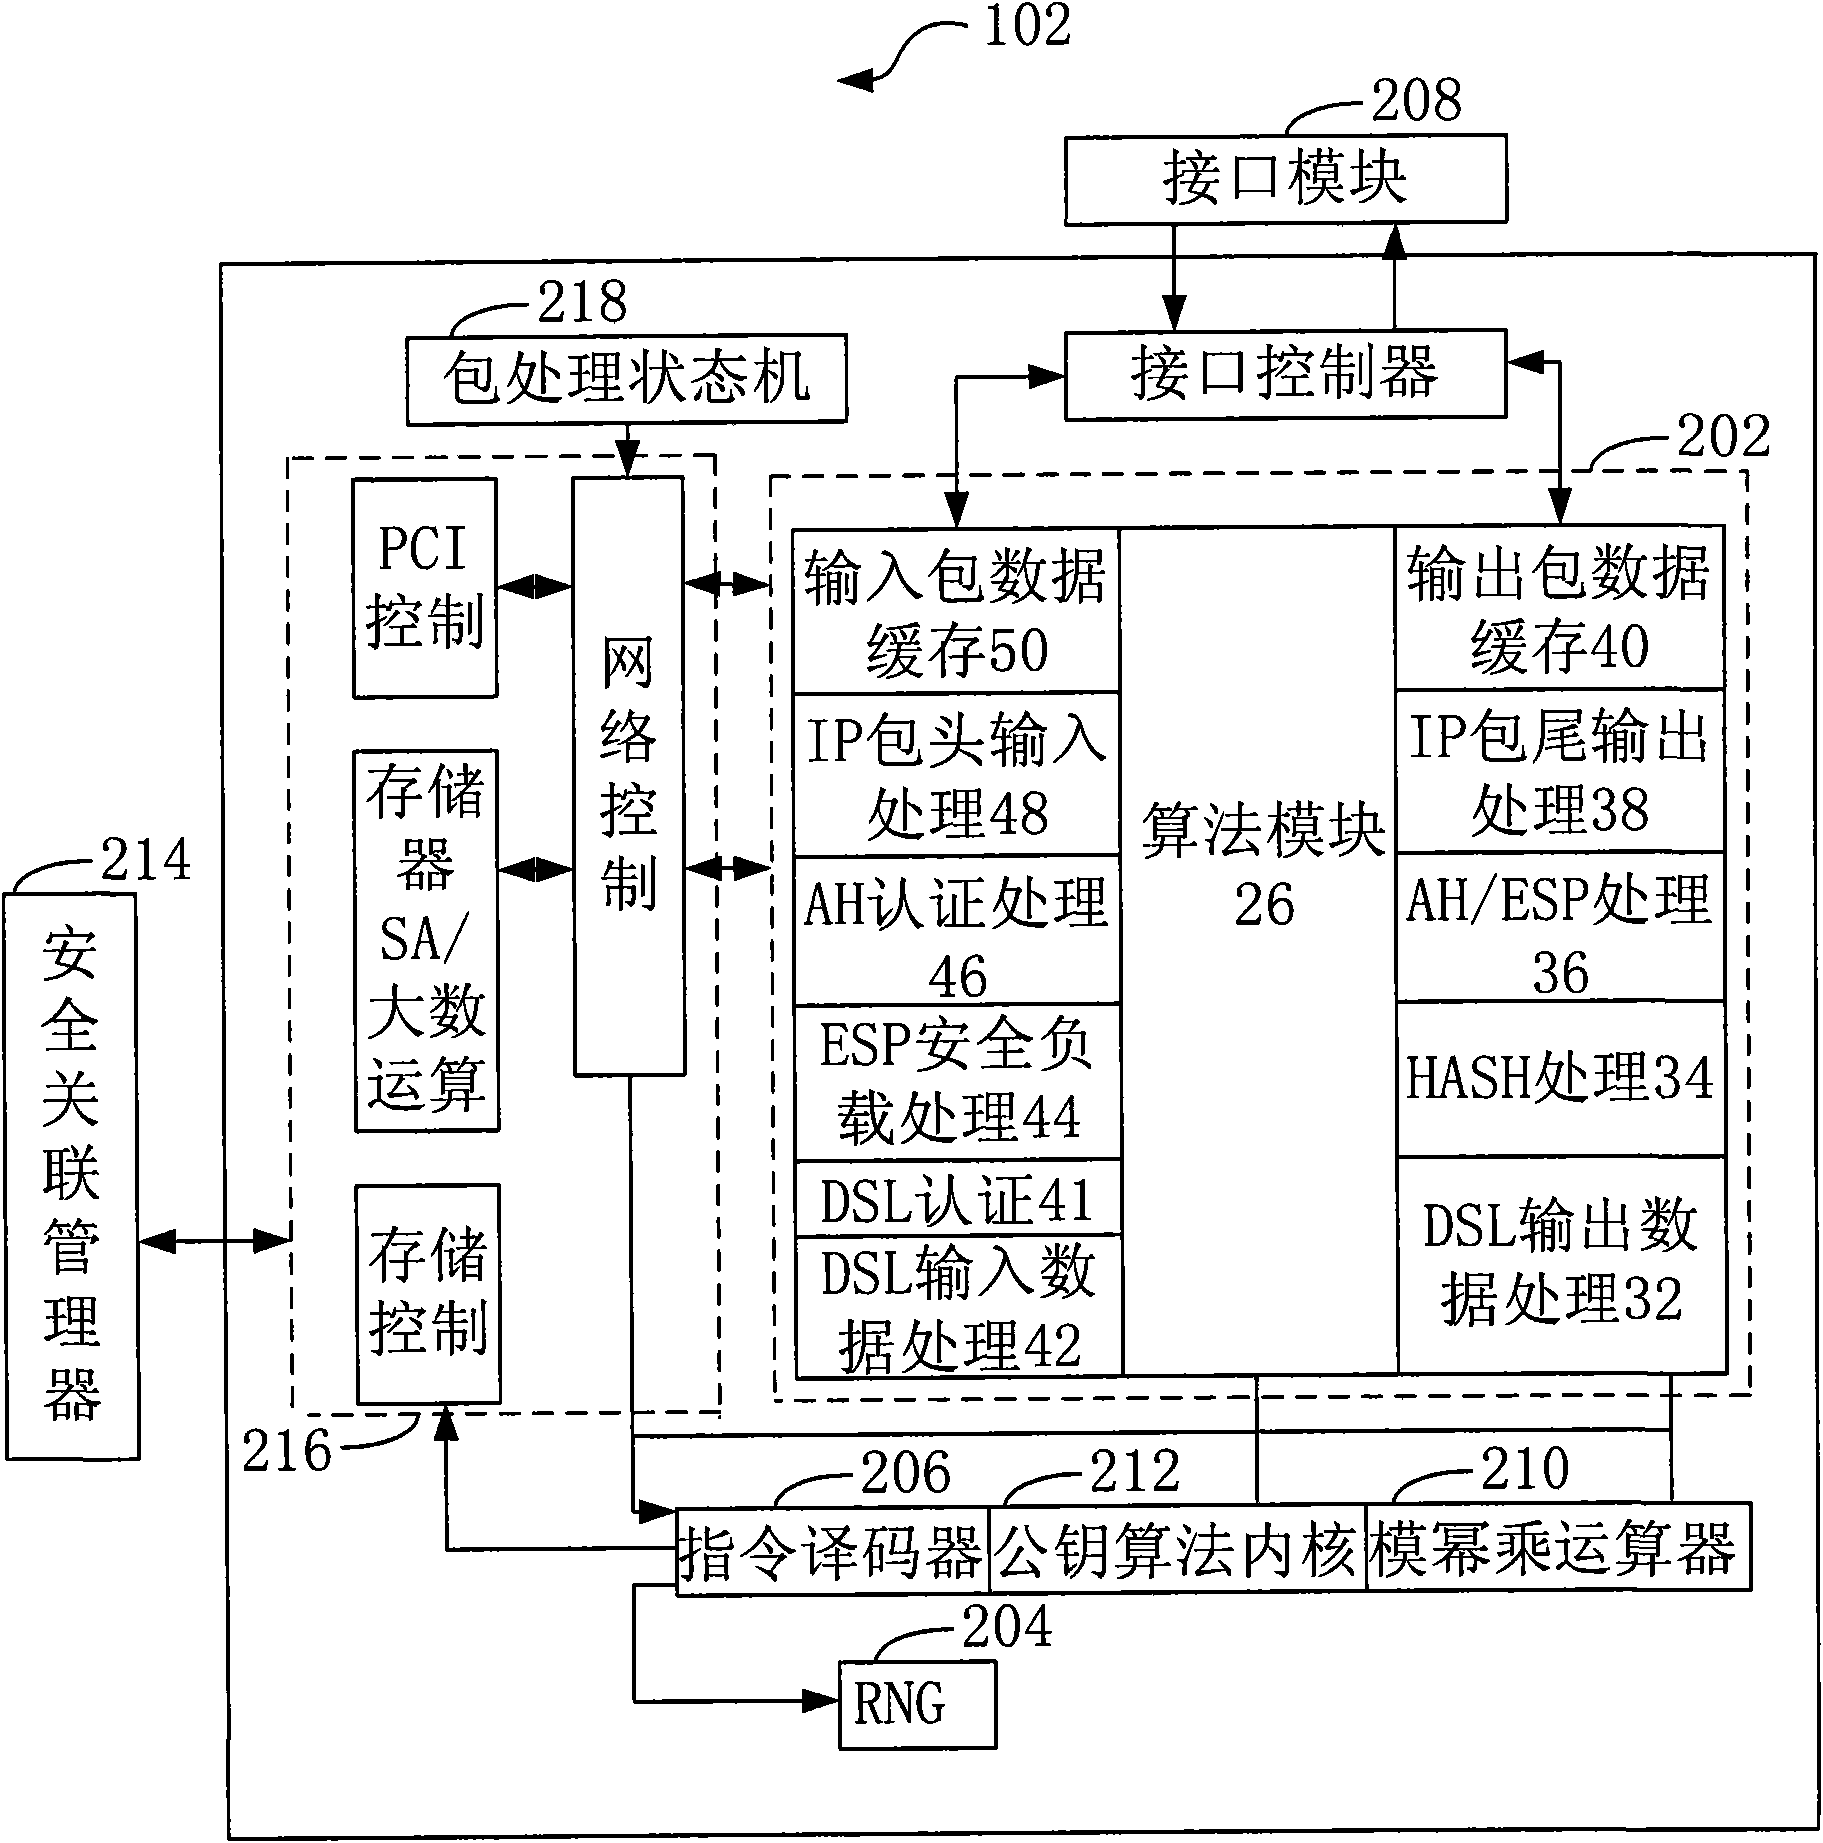 Network security communication method, data security processing device and system for finance